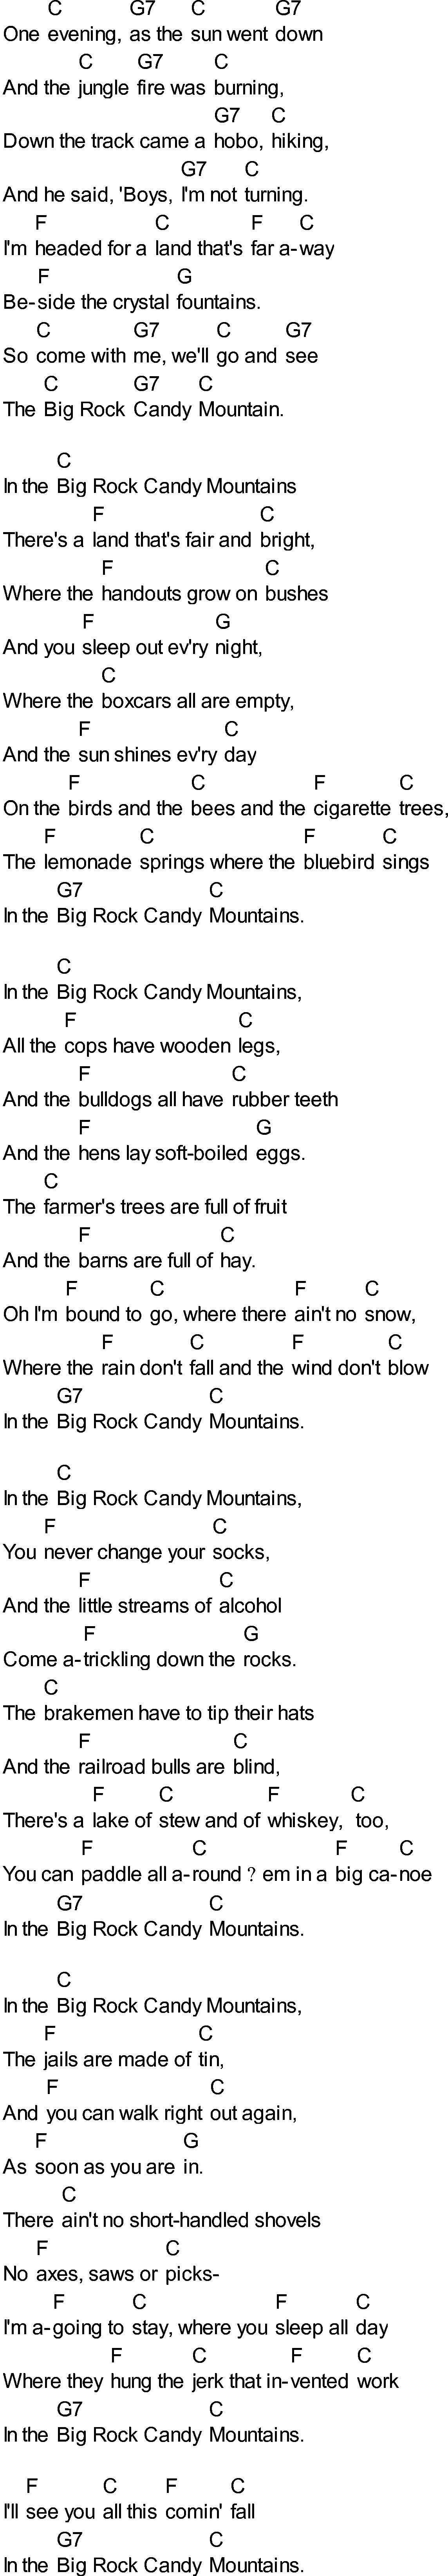 Bluegrass songs with chords - Big Rock Candy Mountain